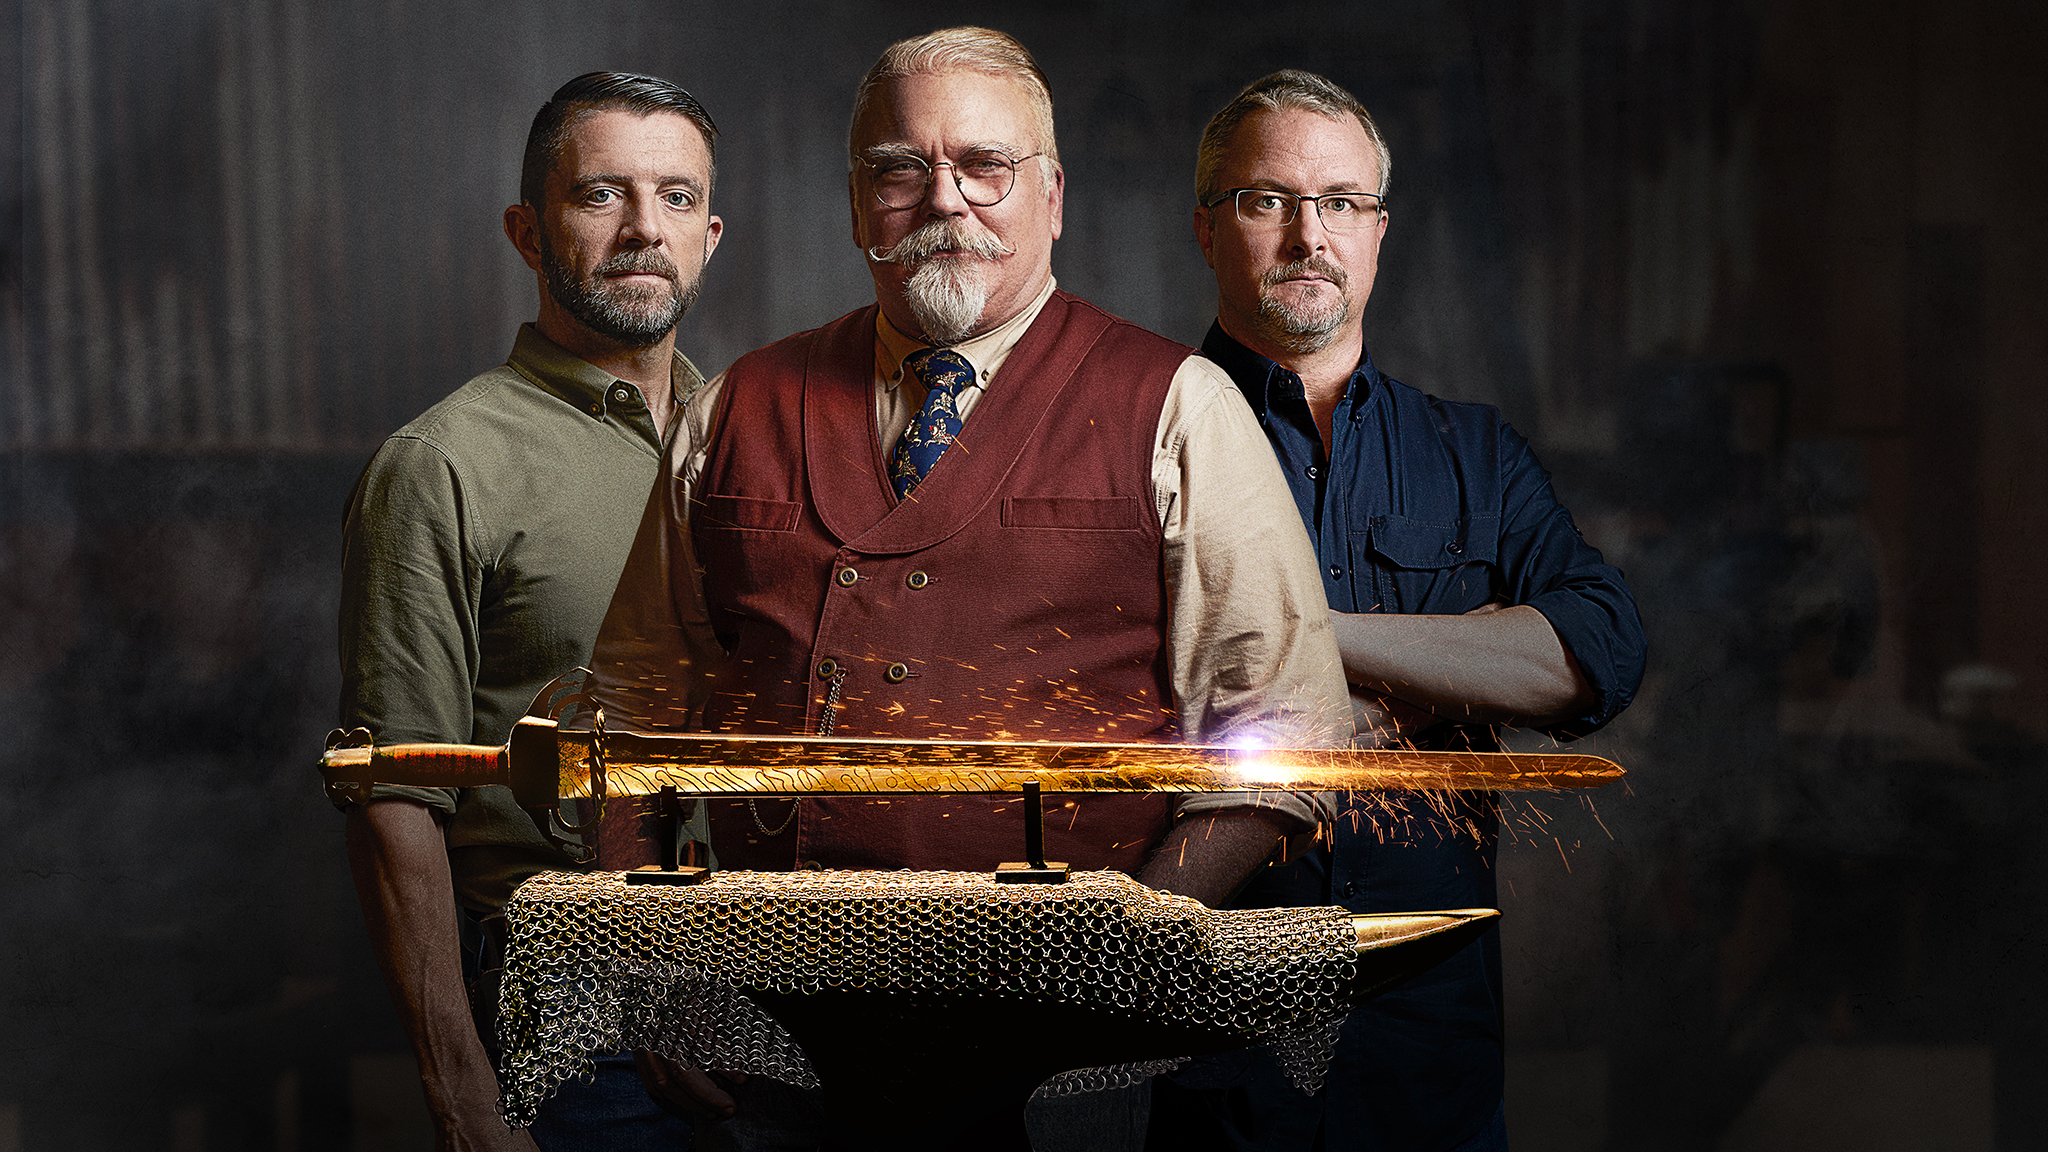 forged in fire season 6 episode 40